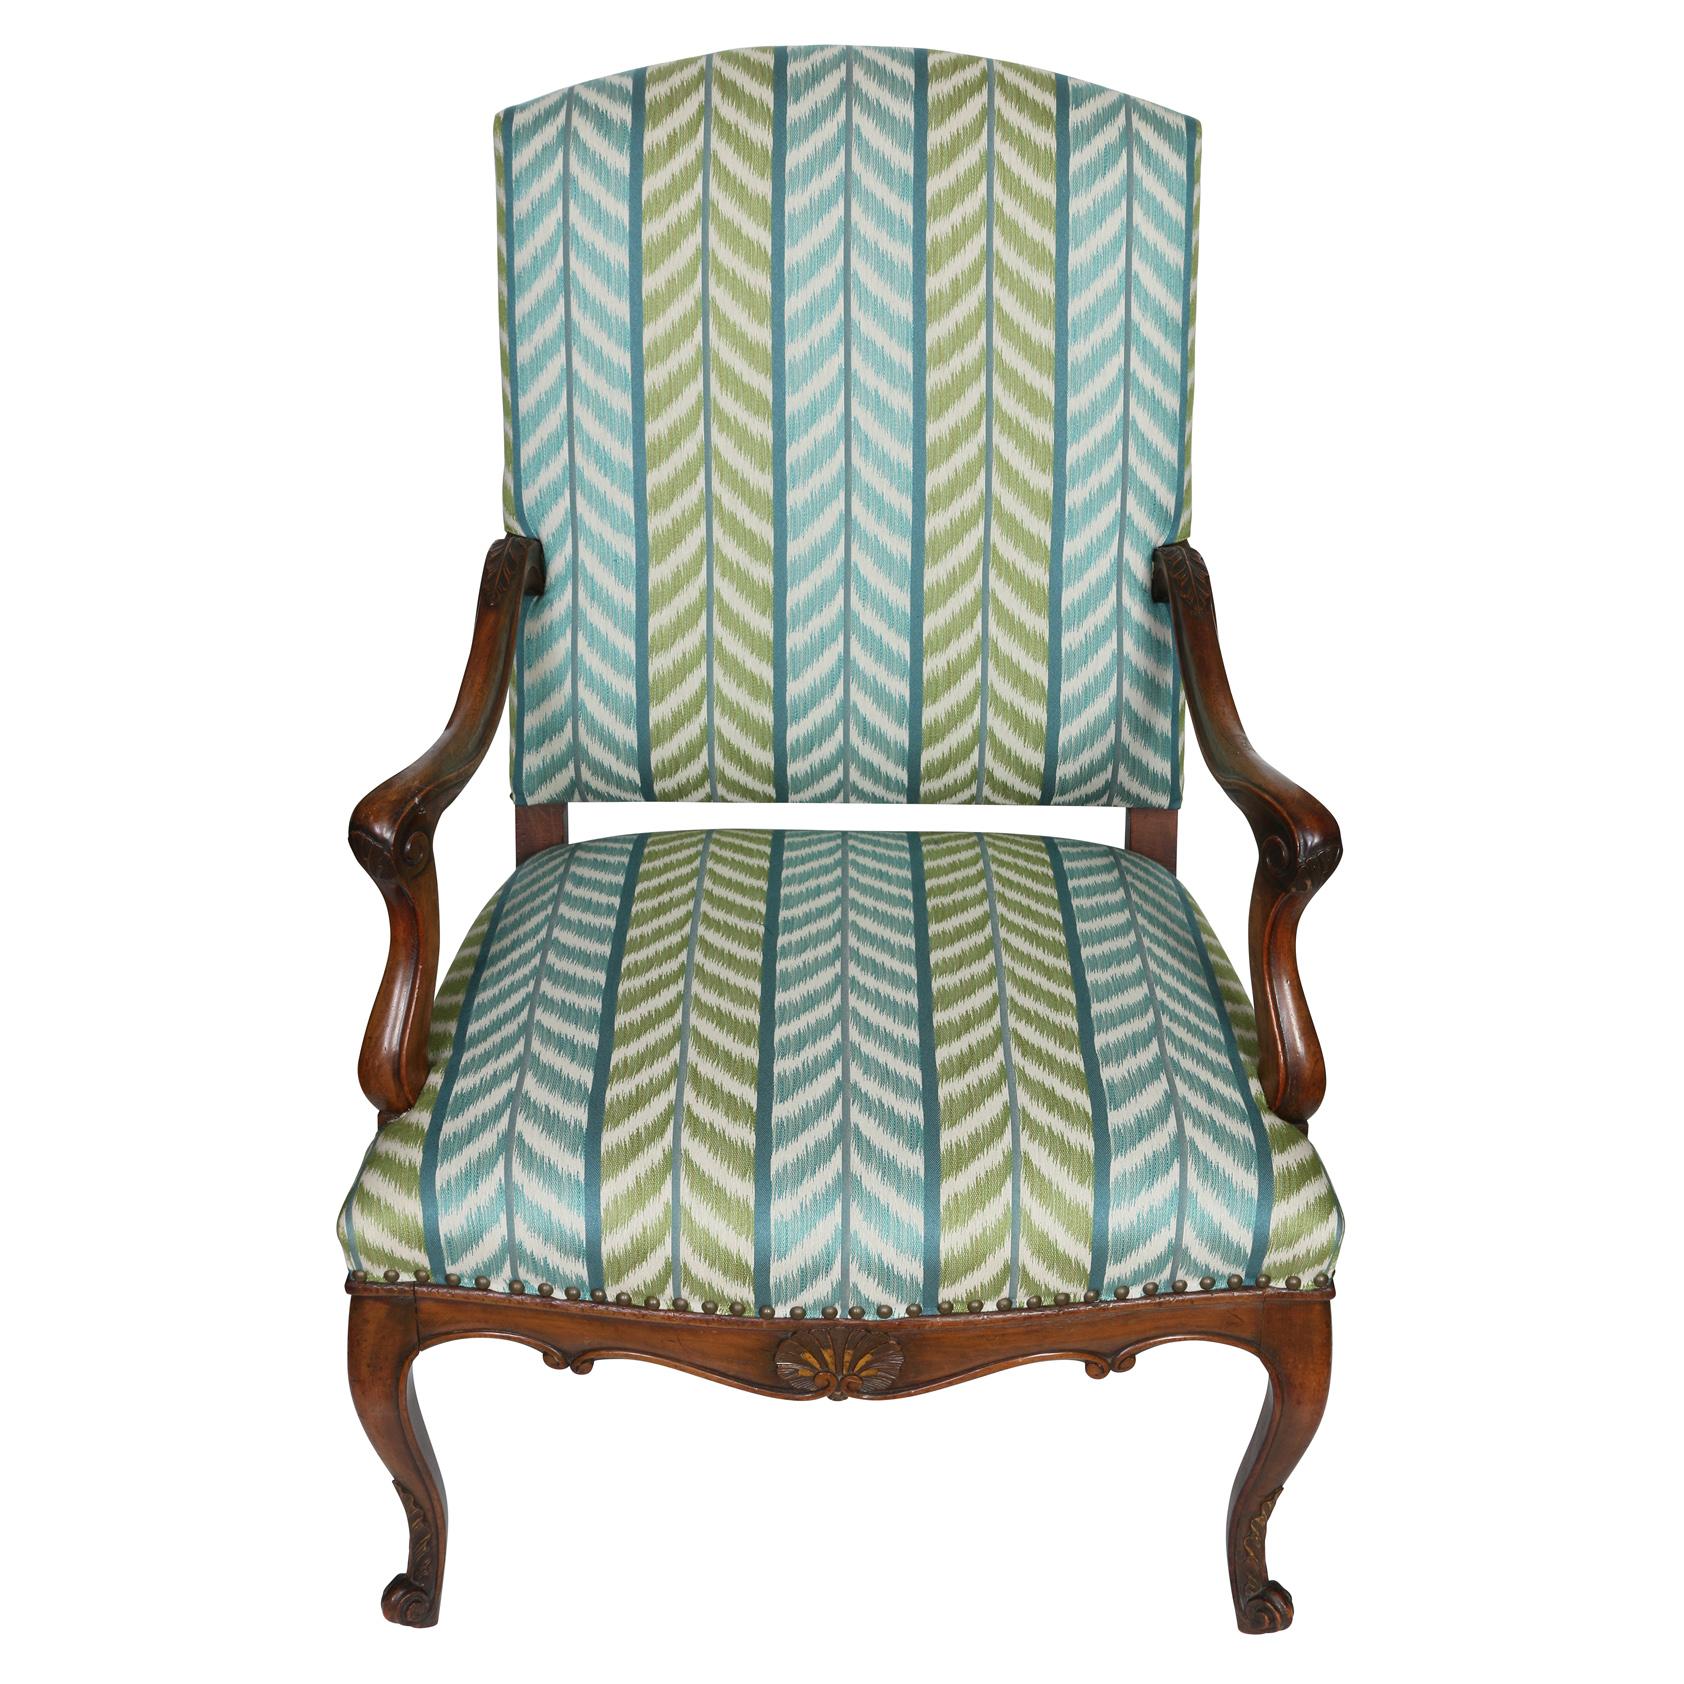 20th Century Pair of Walnut Regence Chairs With Quadrille Blue and Green Chevron Upholstery For Sale